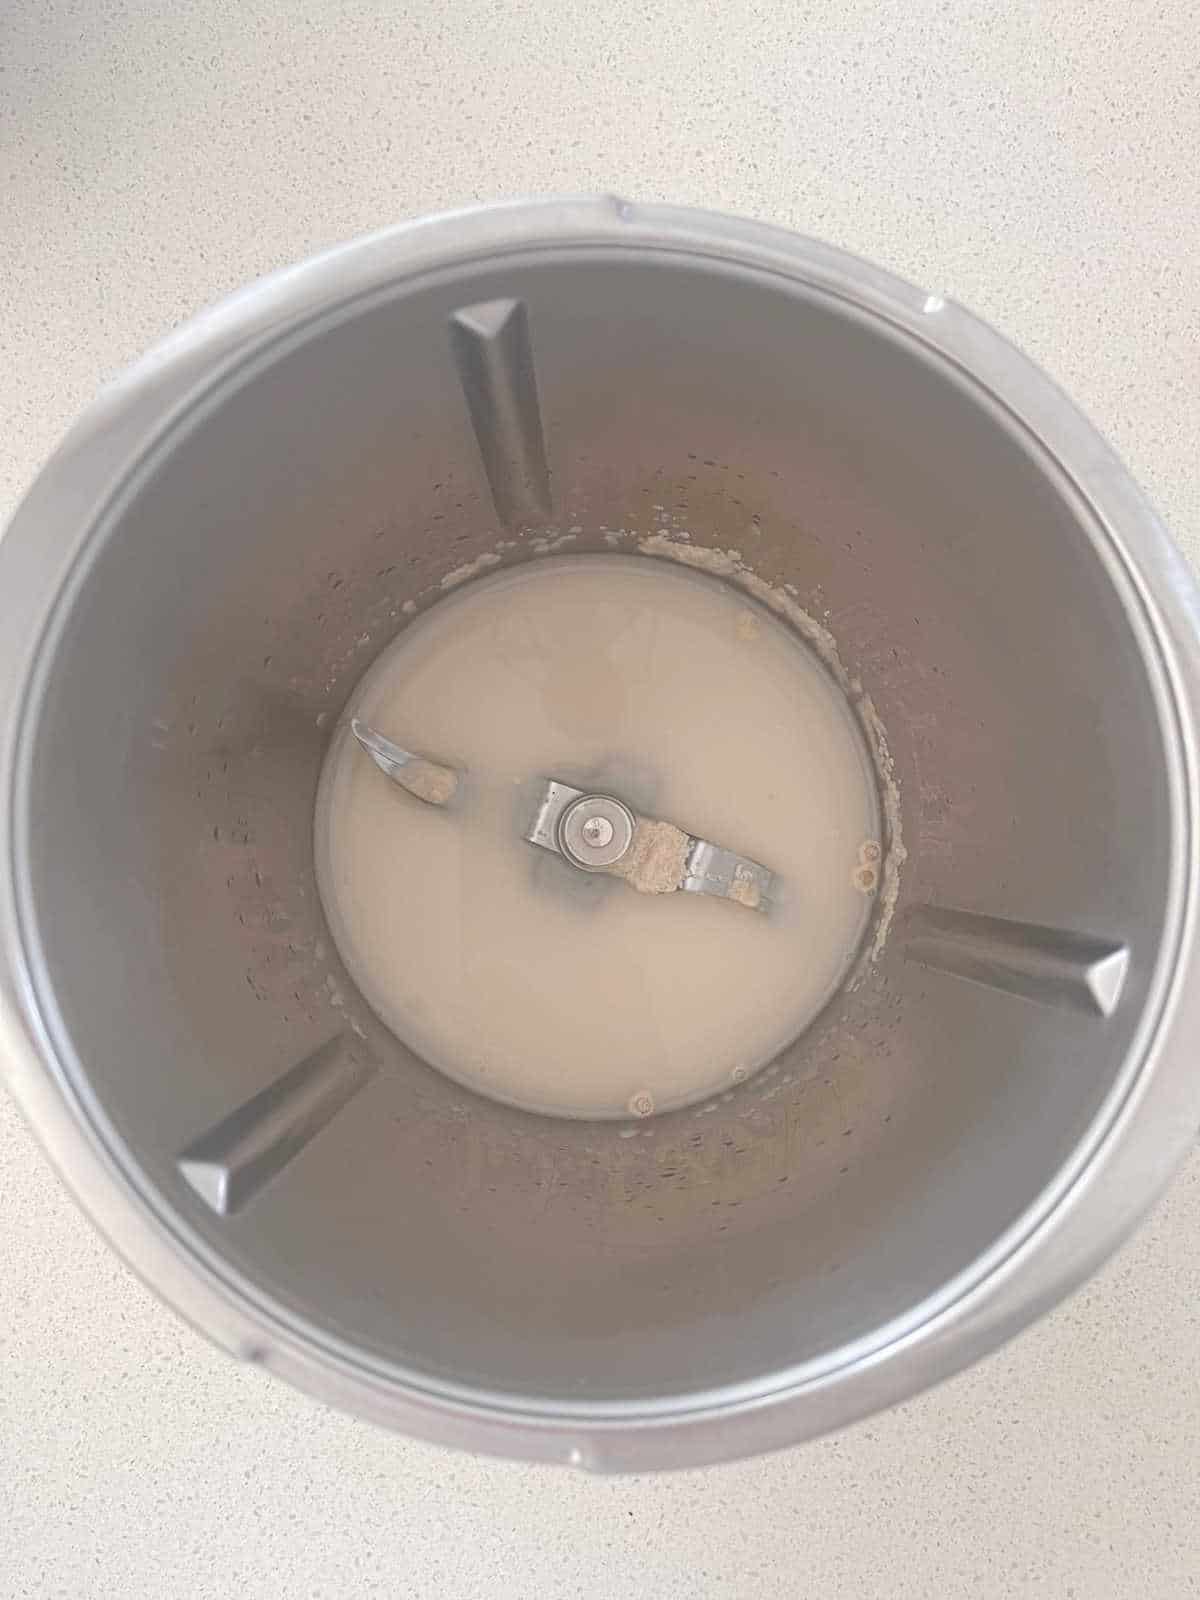 Yeast in Thermomix bowl